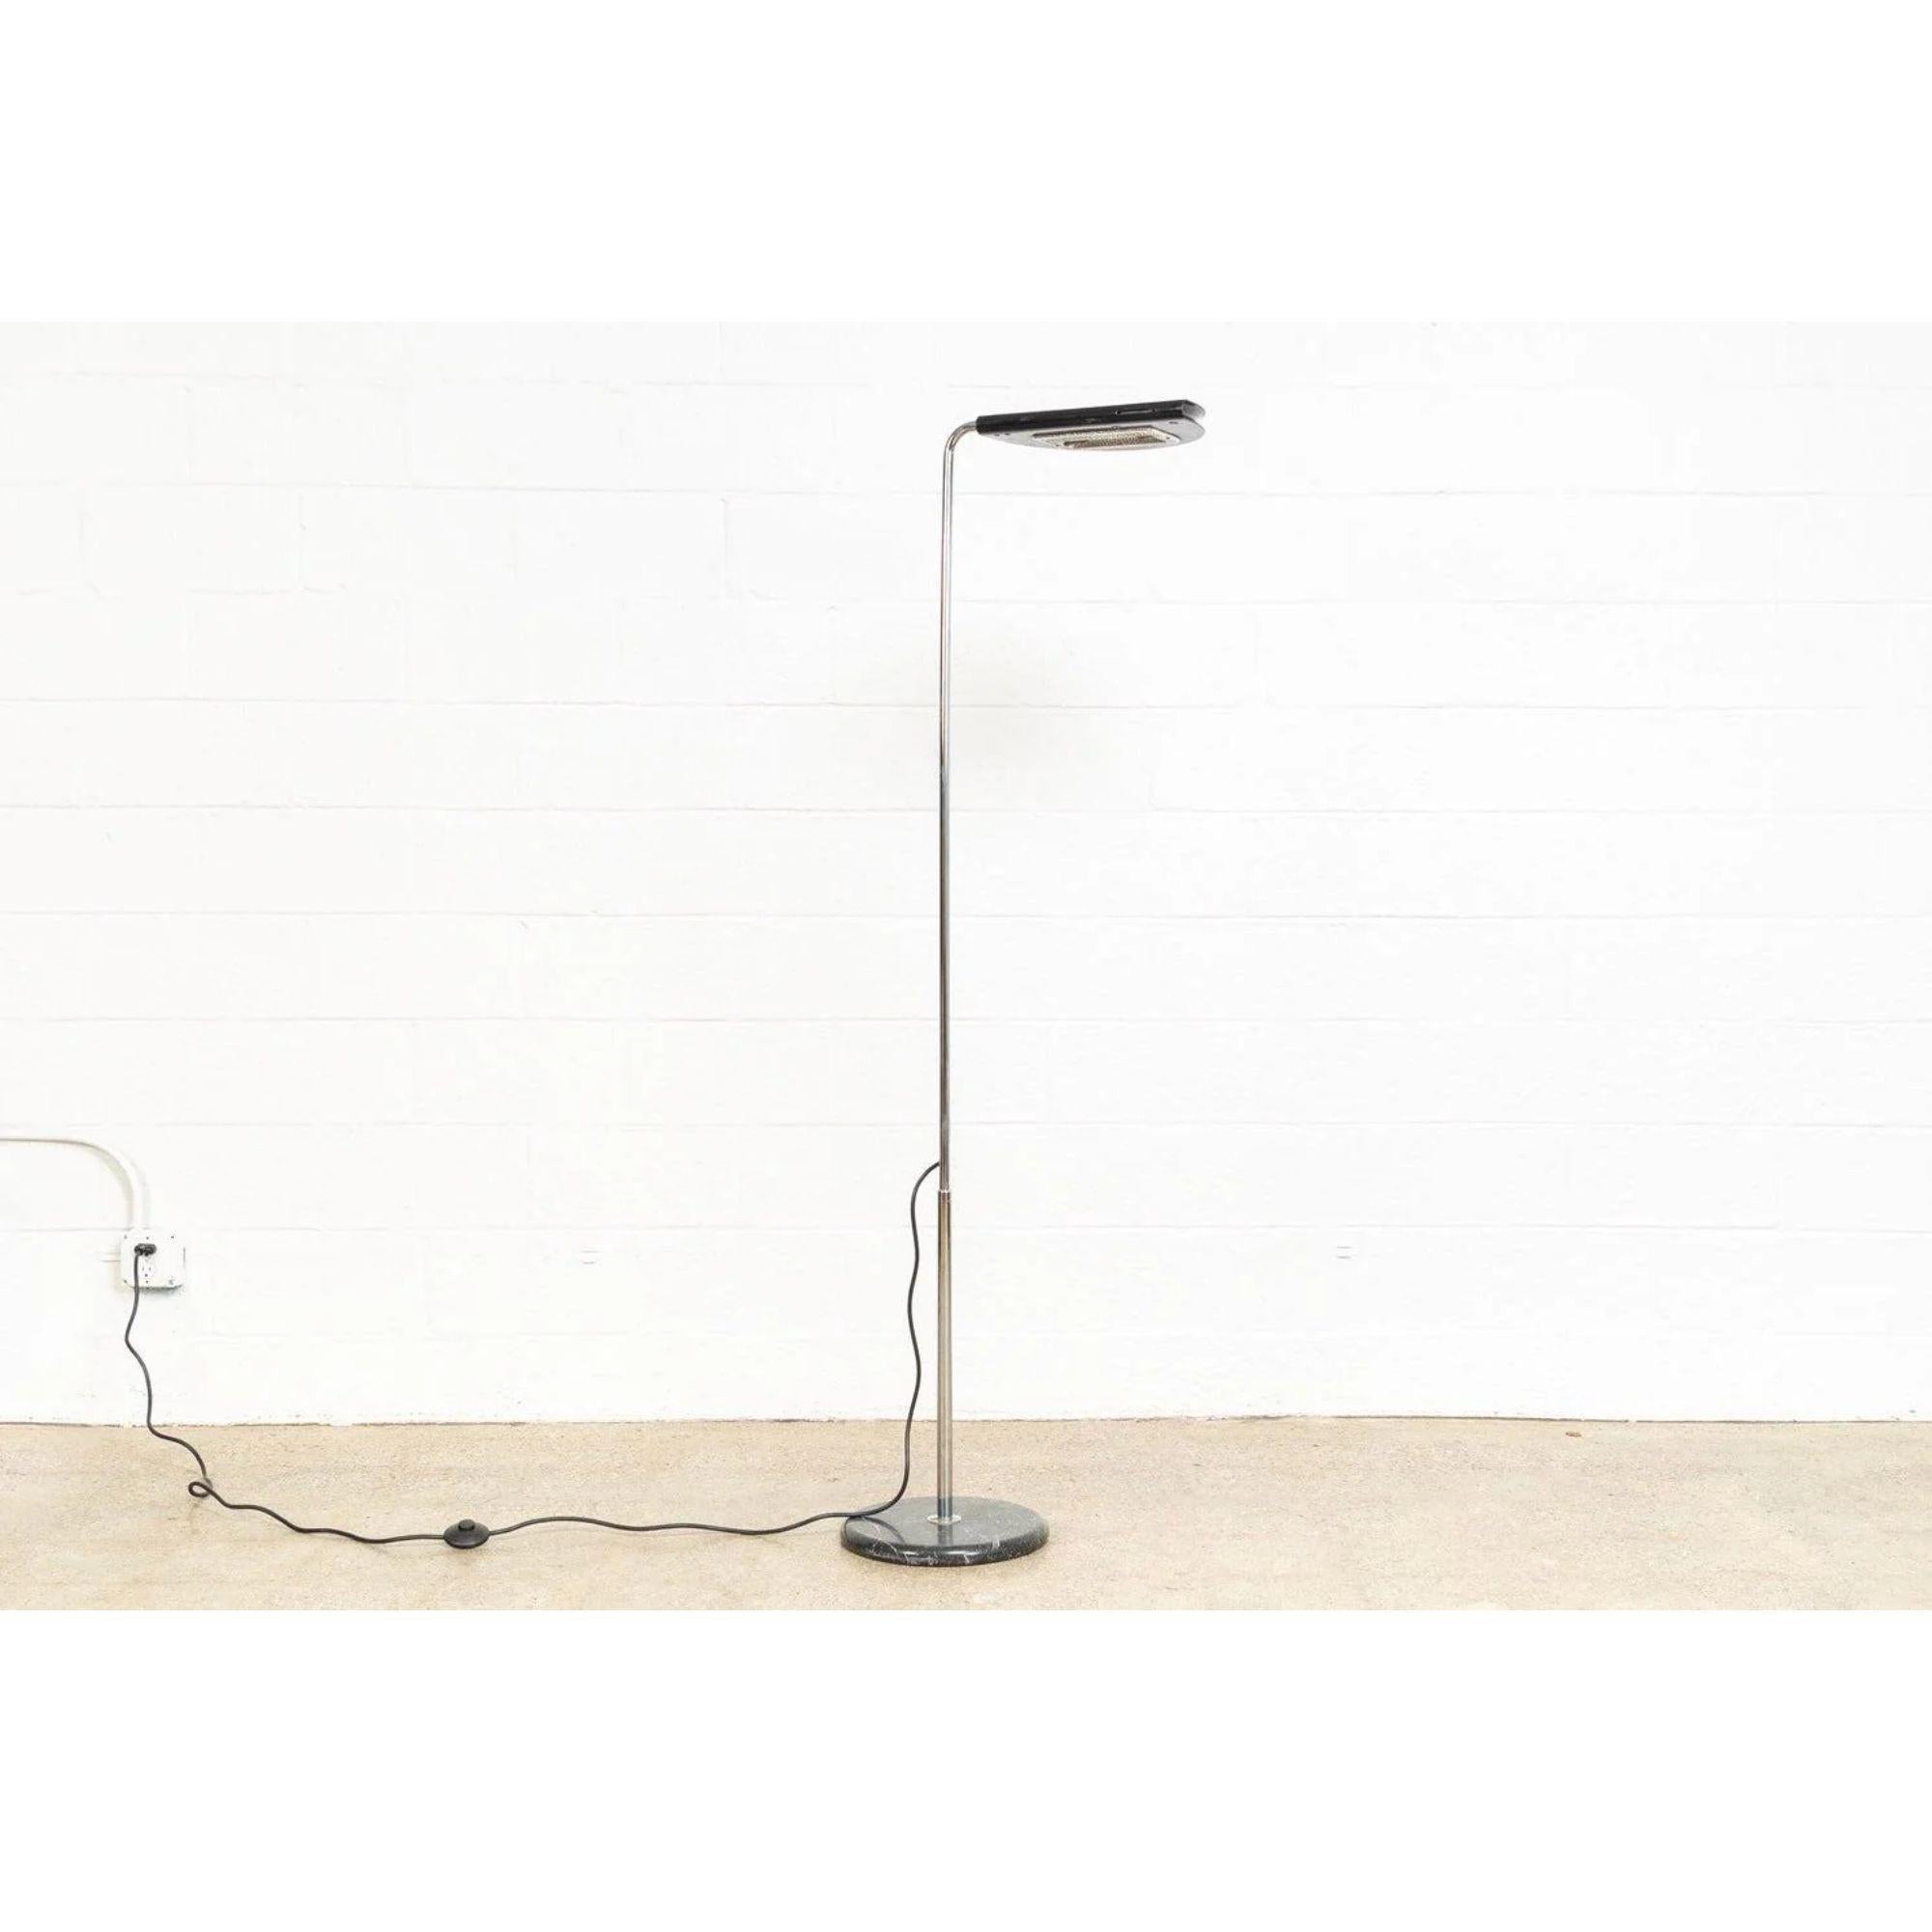 This vintage Mid-Century Modern Italian Bruno Gecchelin “Mezzaluna“ black floor lamp manufactured by Skipper and made in Italy is circa 1970. The sleek, Space Age, modernist design features a black Carrara marble base with a chrome-plated steel